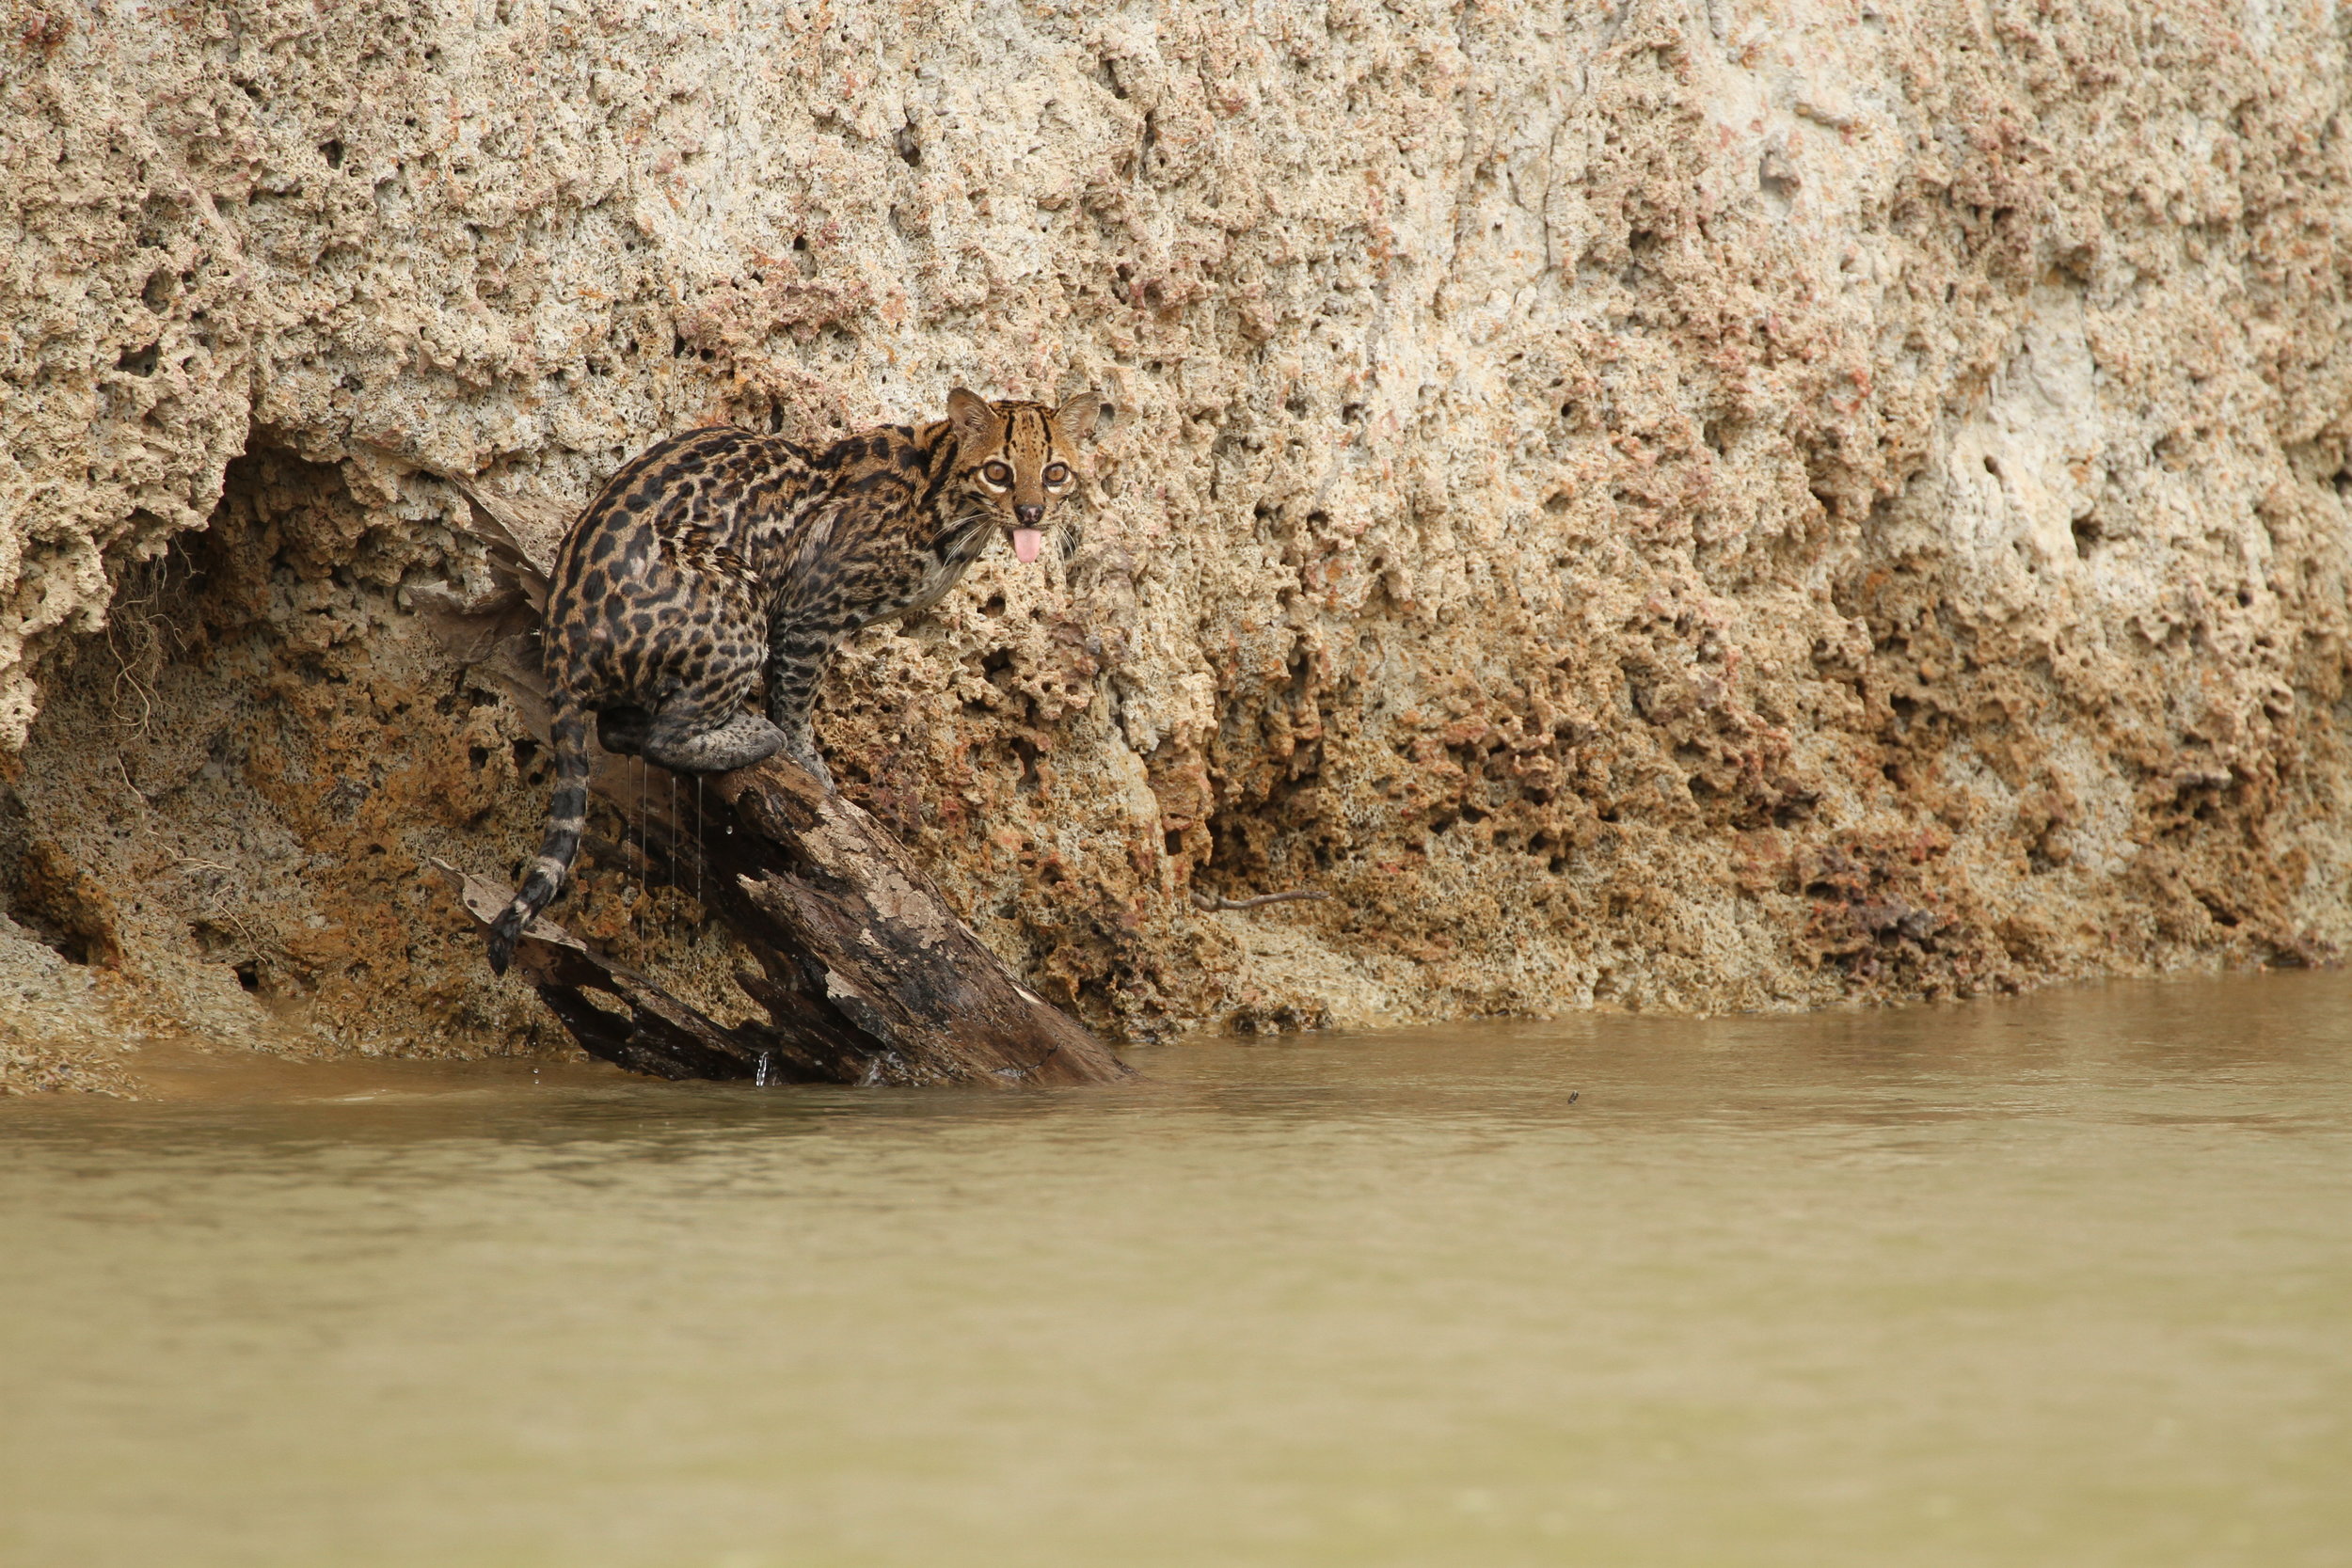 Ocelots are mostly nocturnal  but this one was   seen swimming across the river.JPG